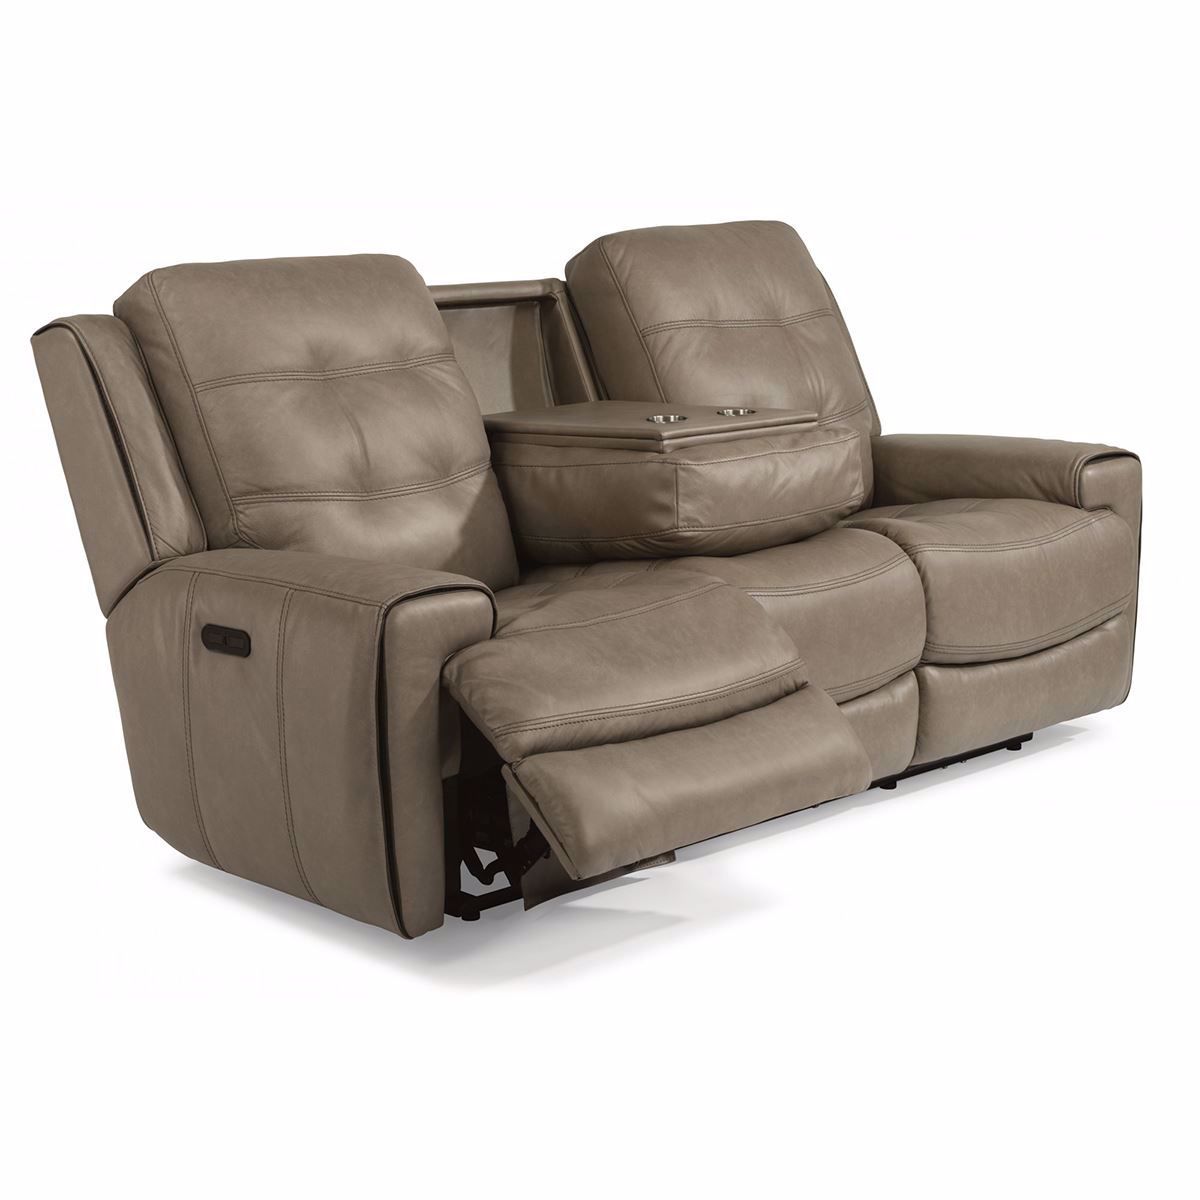 Wicklow Power Reclining Leather Sofa With Power Headrest Throughout Charleston Power Reclining Sofas (View 1 of 15)